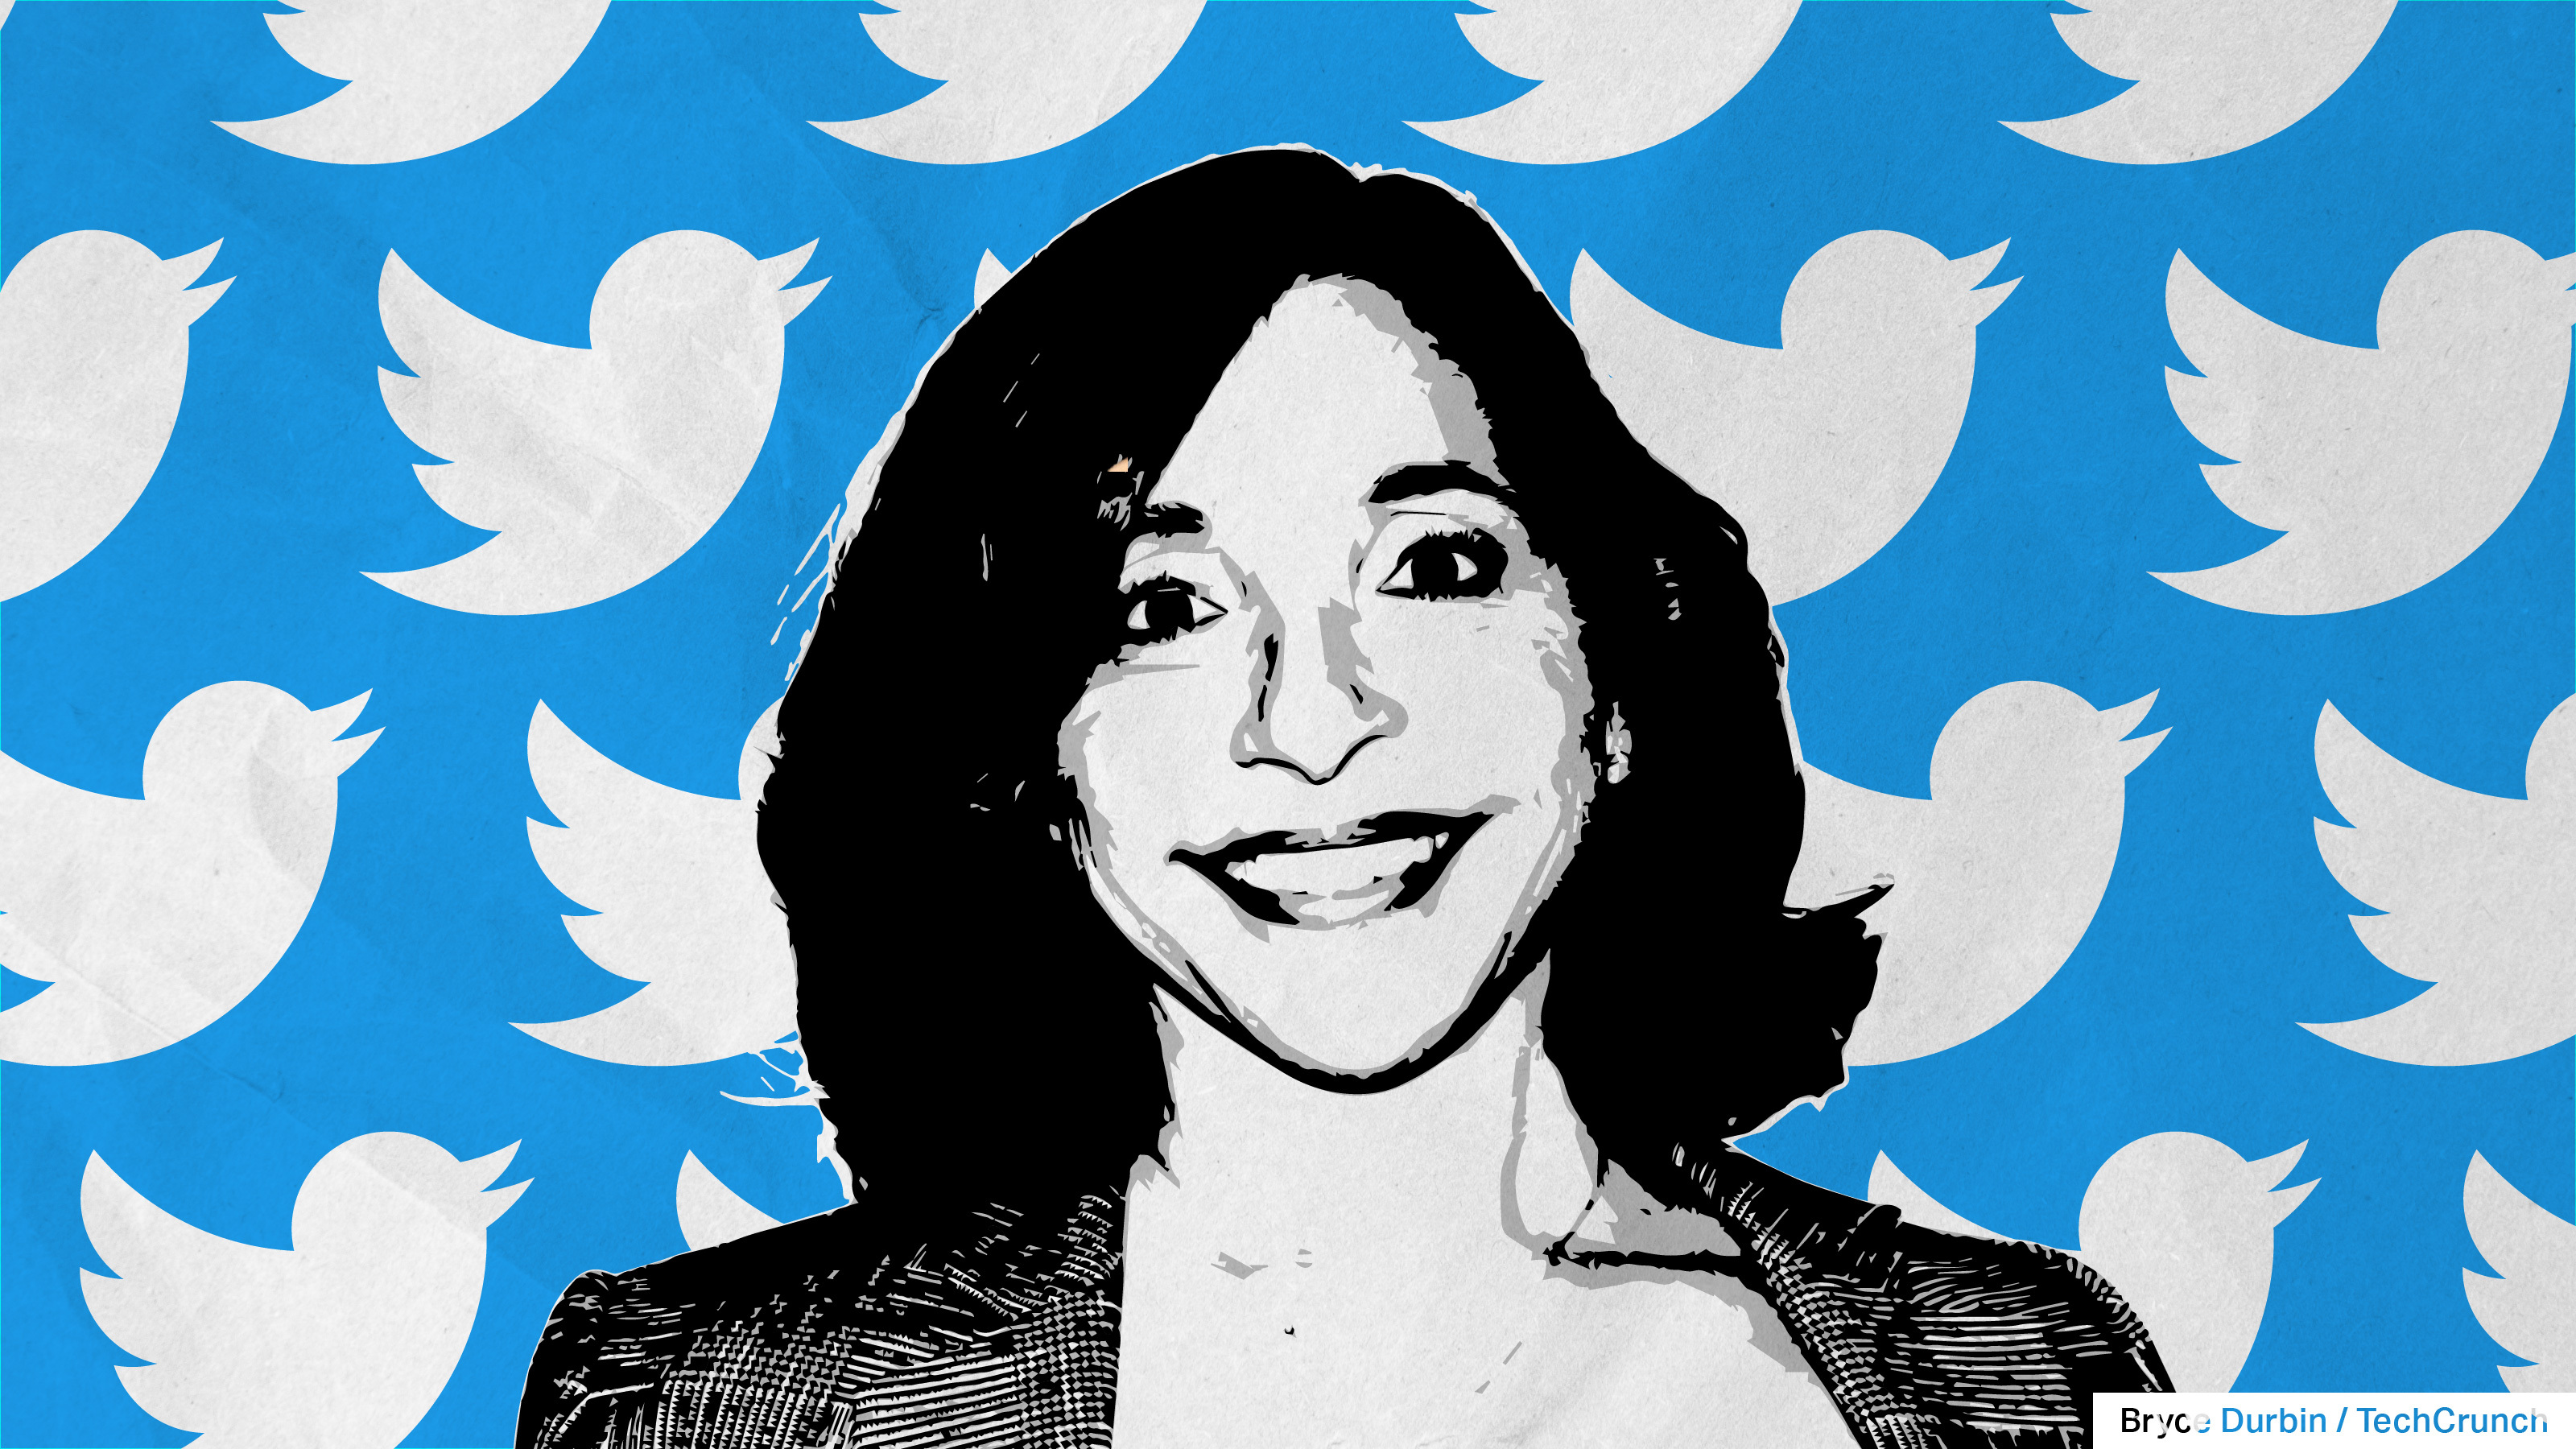 Image Of Linda Yaccarino With Twitter Birds In The Background, Representing The New Ceo Of Twitter